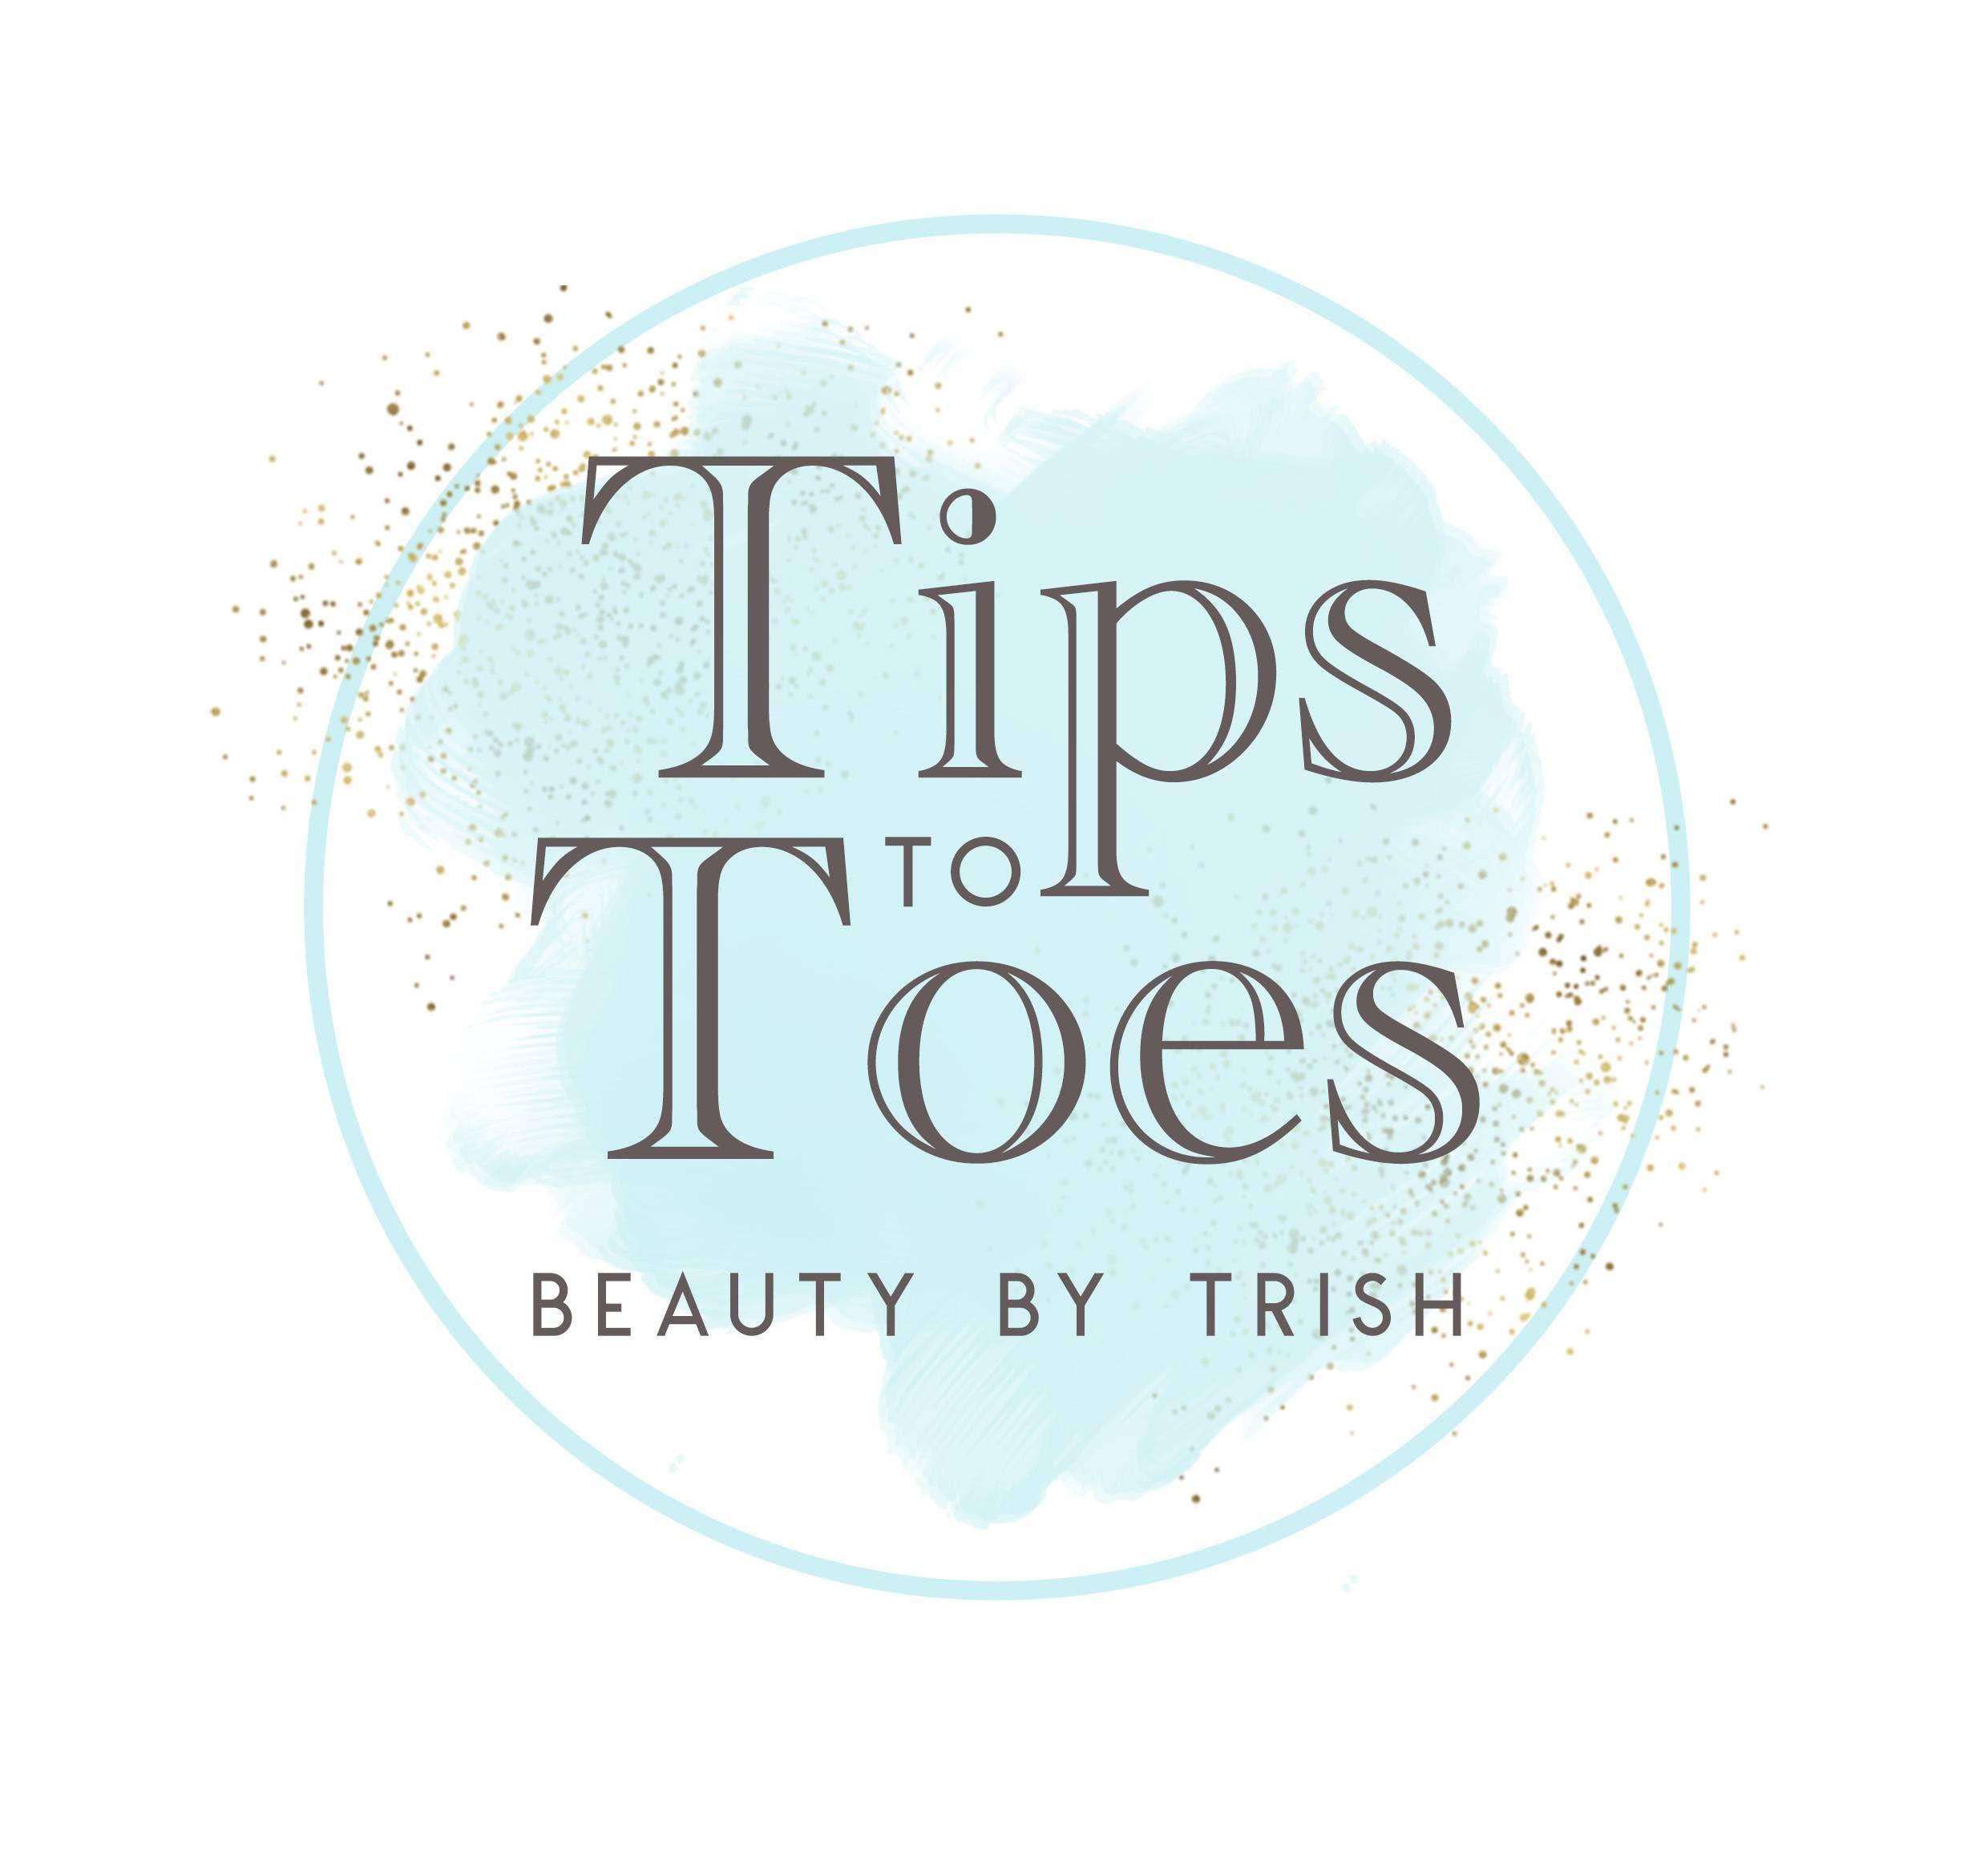 Tips To Toes Aberdare